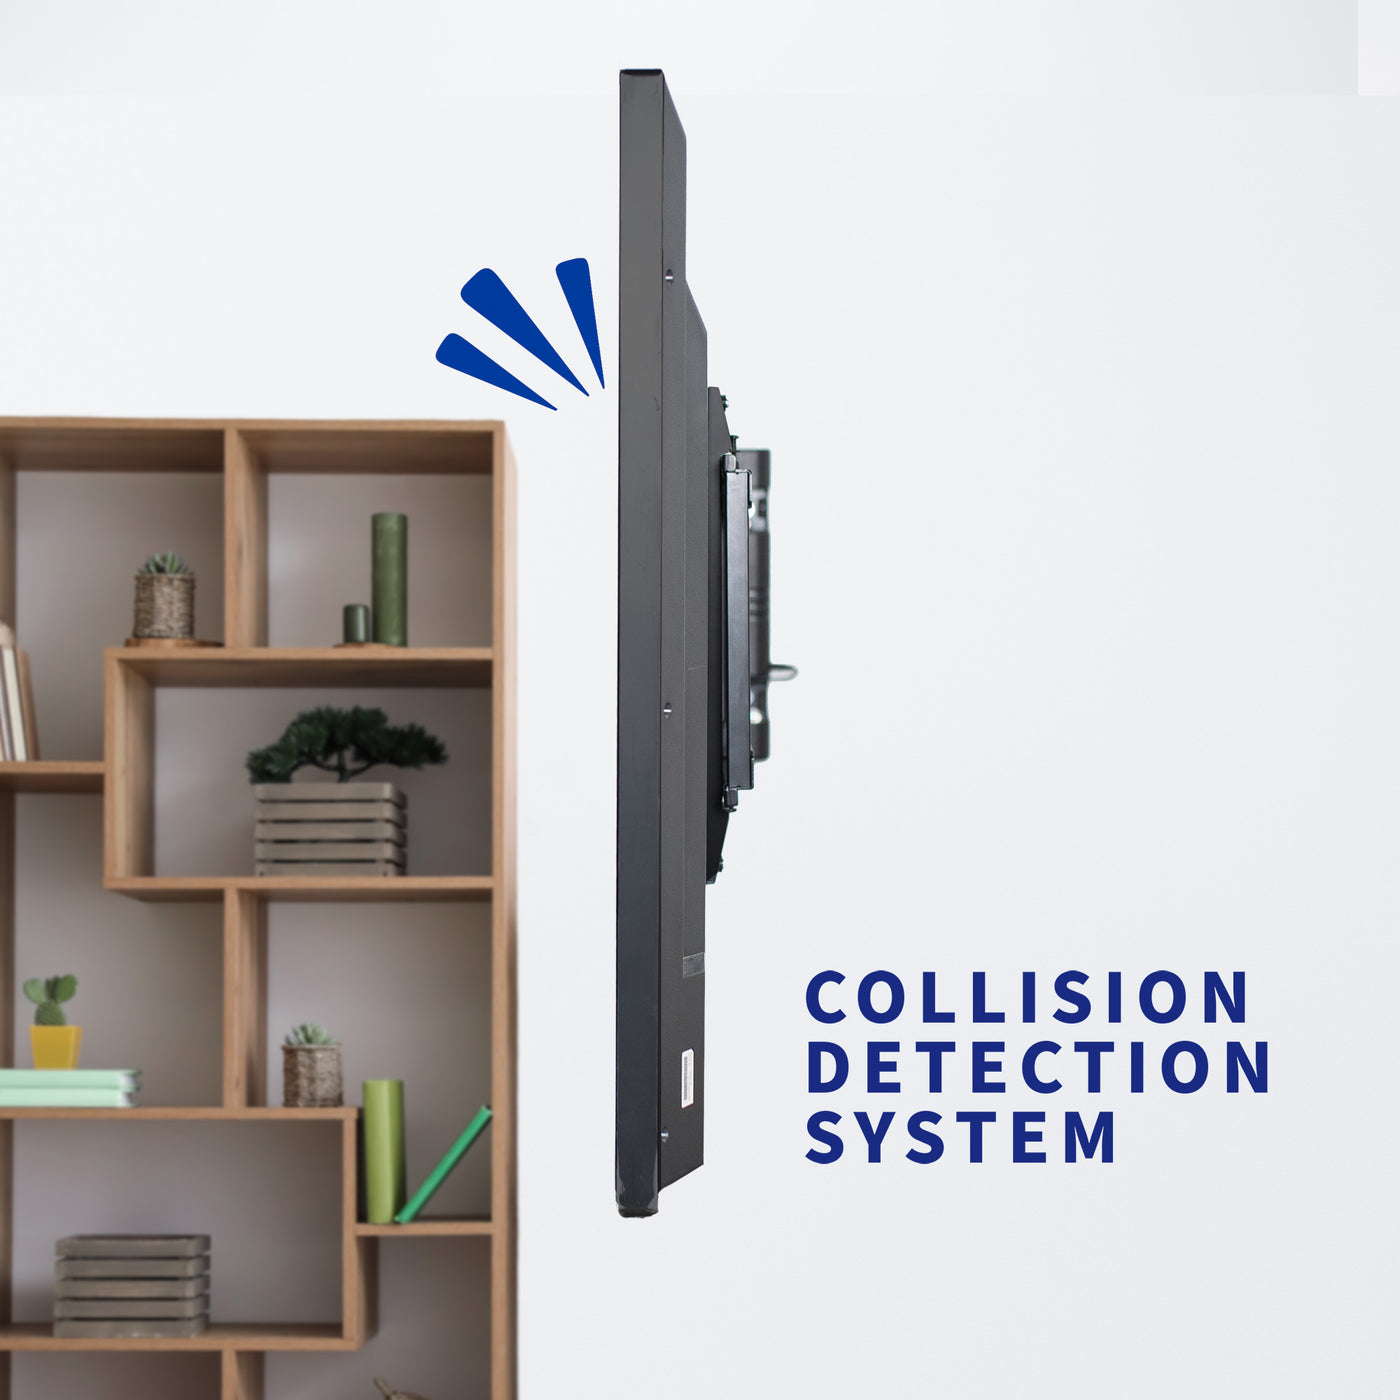 Built-in collision detection system.